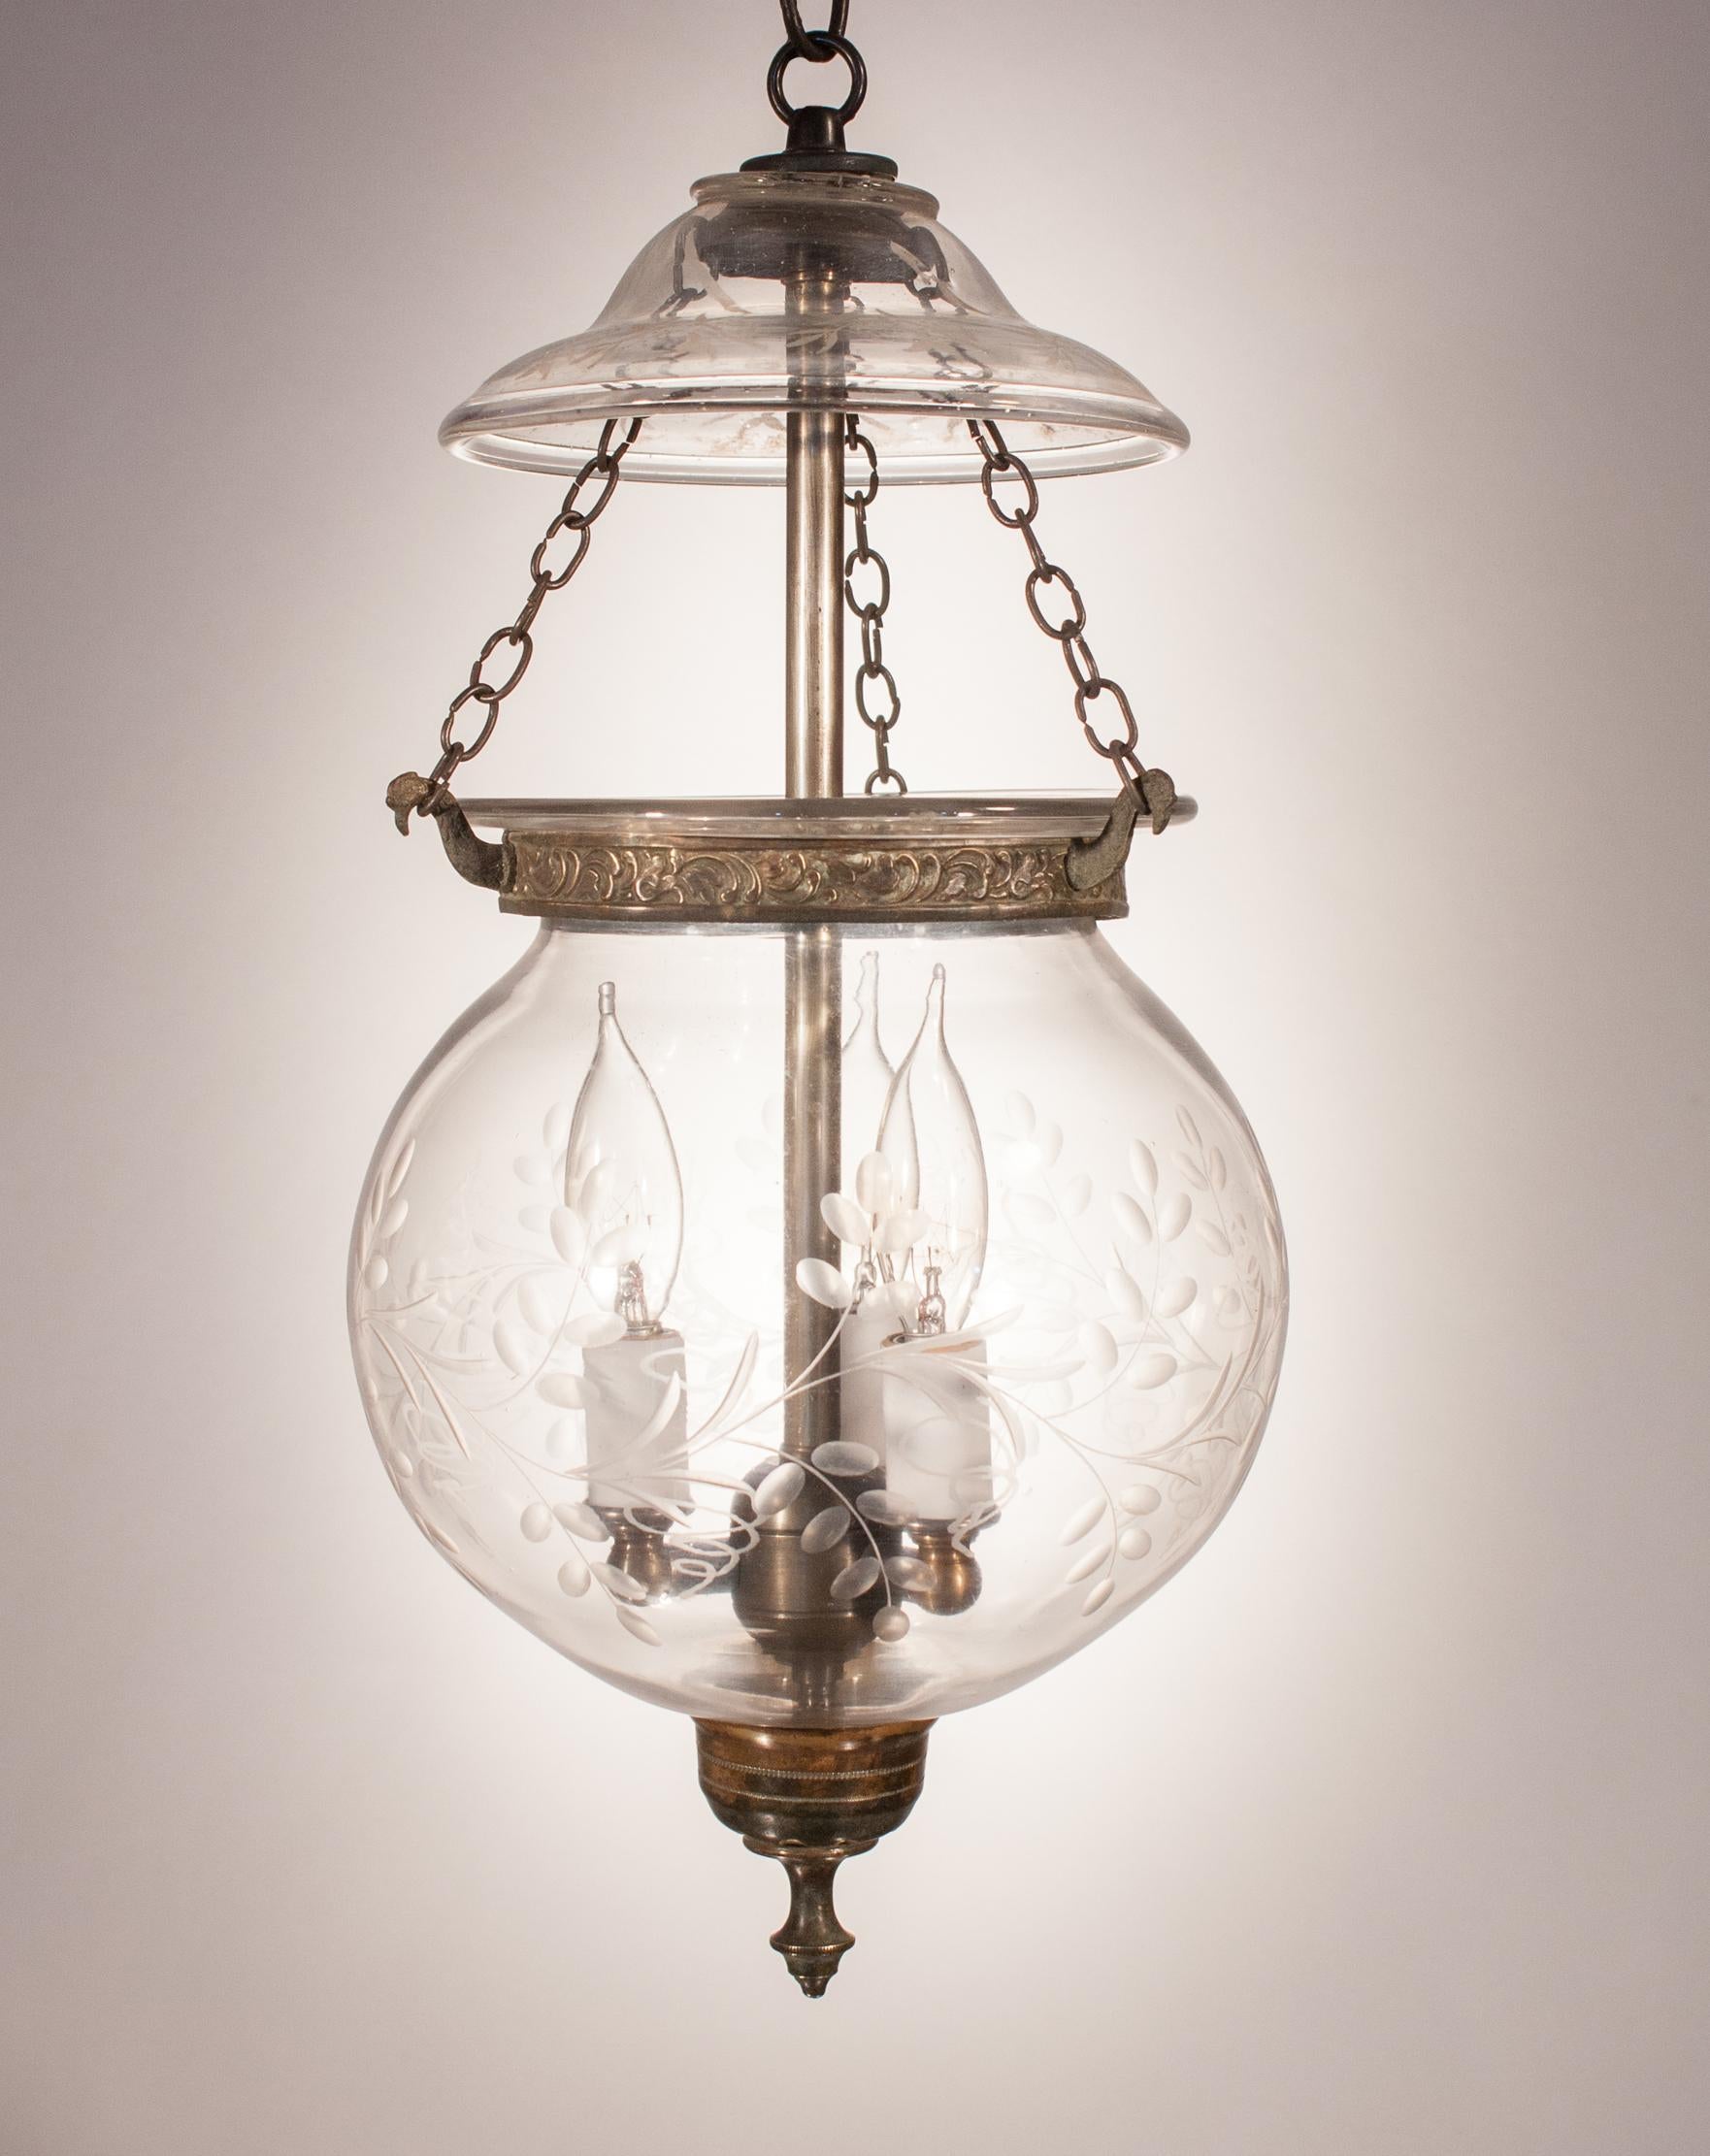 A hand blown glass globe bell jar lantern, circa 1870, with lovely form and a fluidly etched vine motif. The lantern features its original, embossed brass band and finial, which is difficult to find in a globe this old. Shown here with a decorated